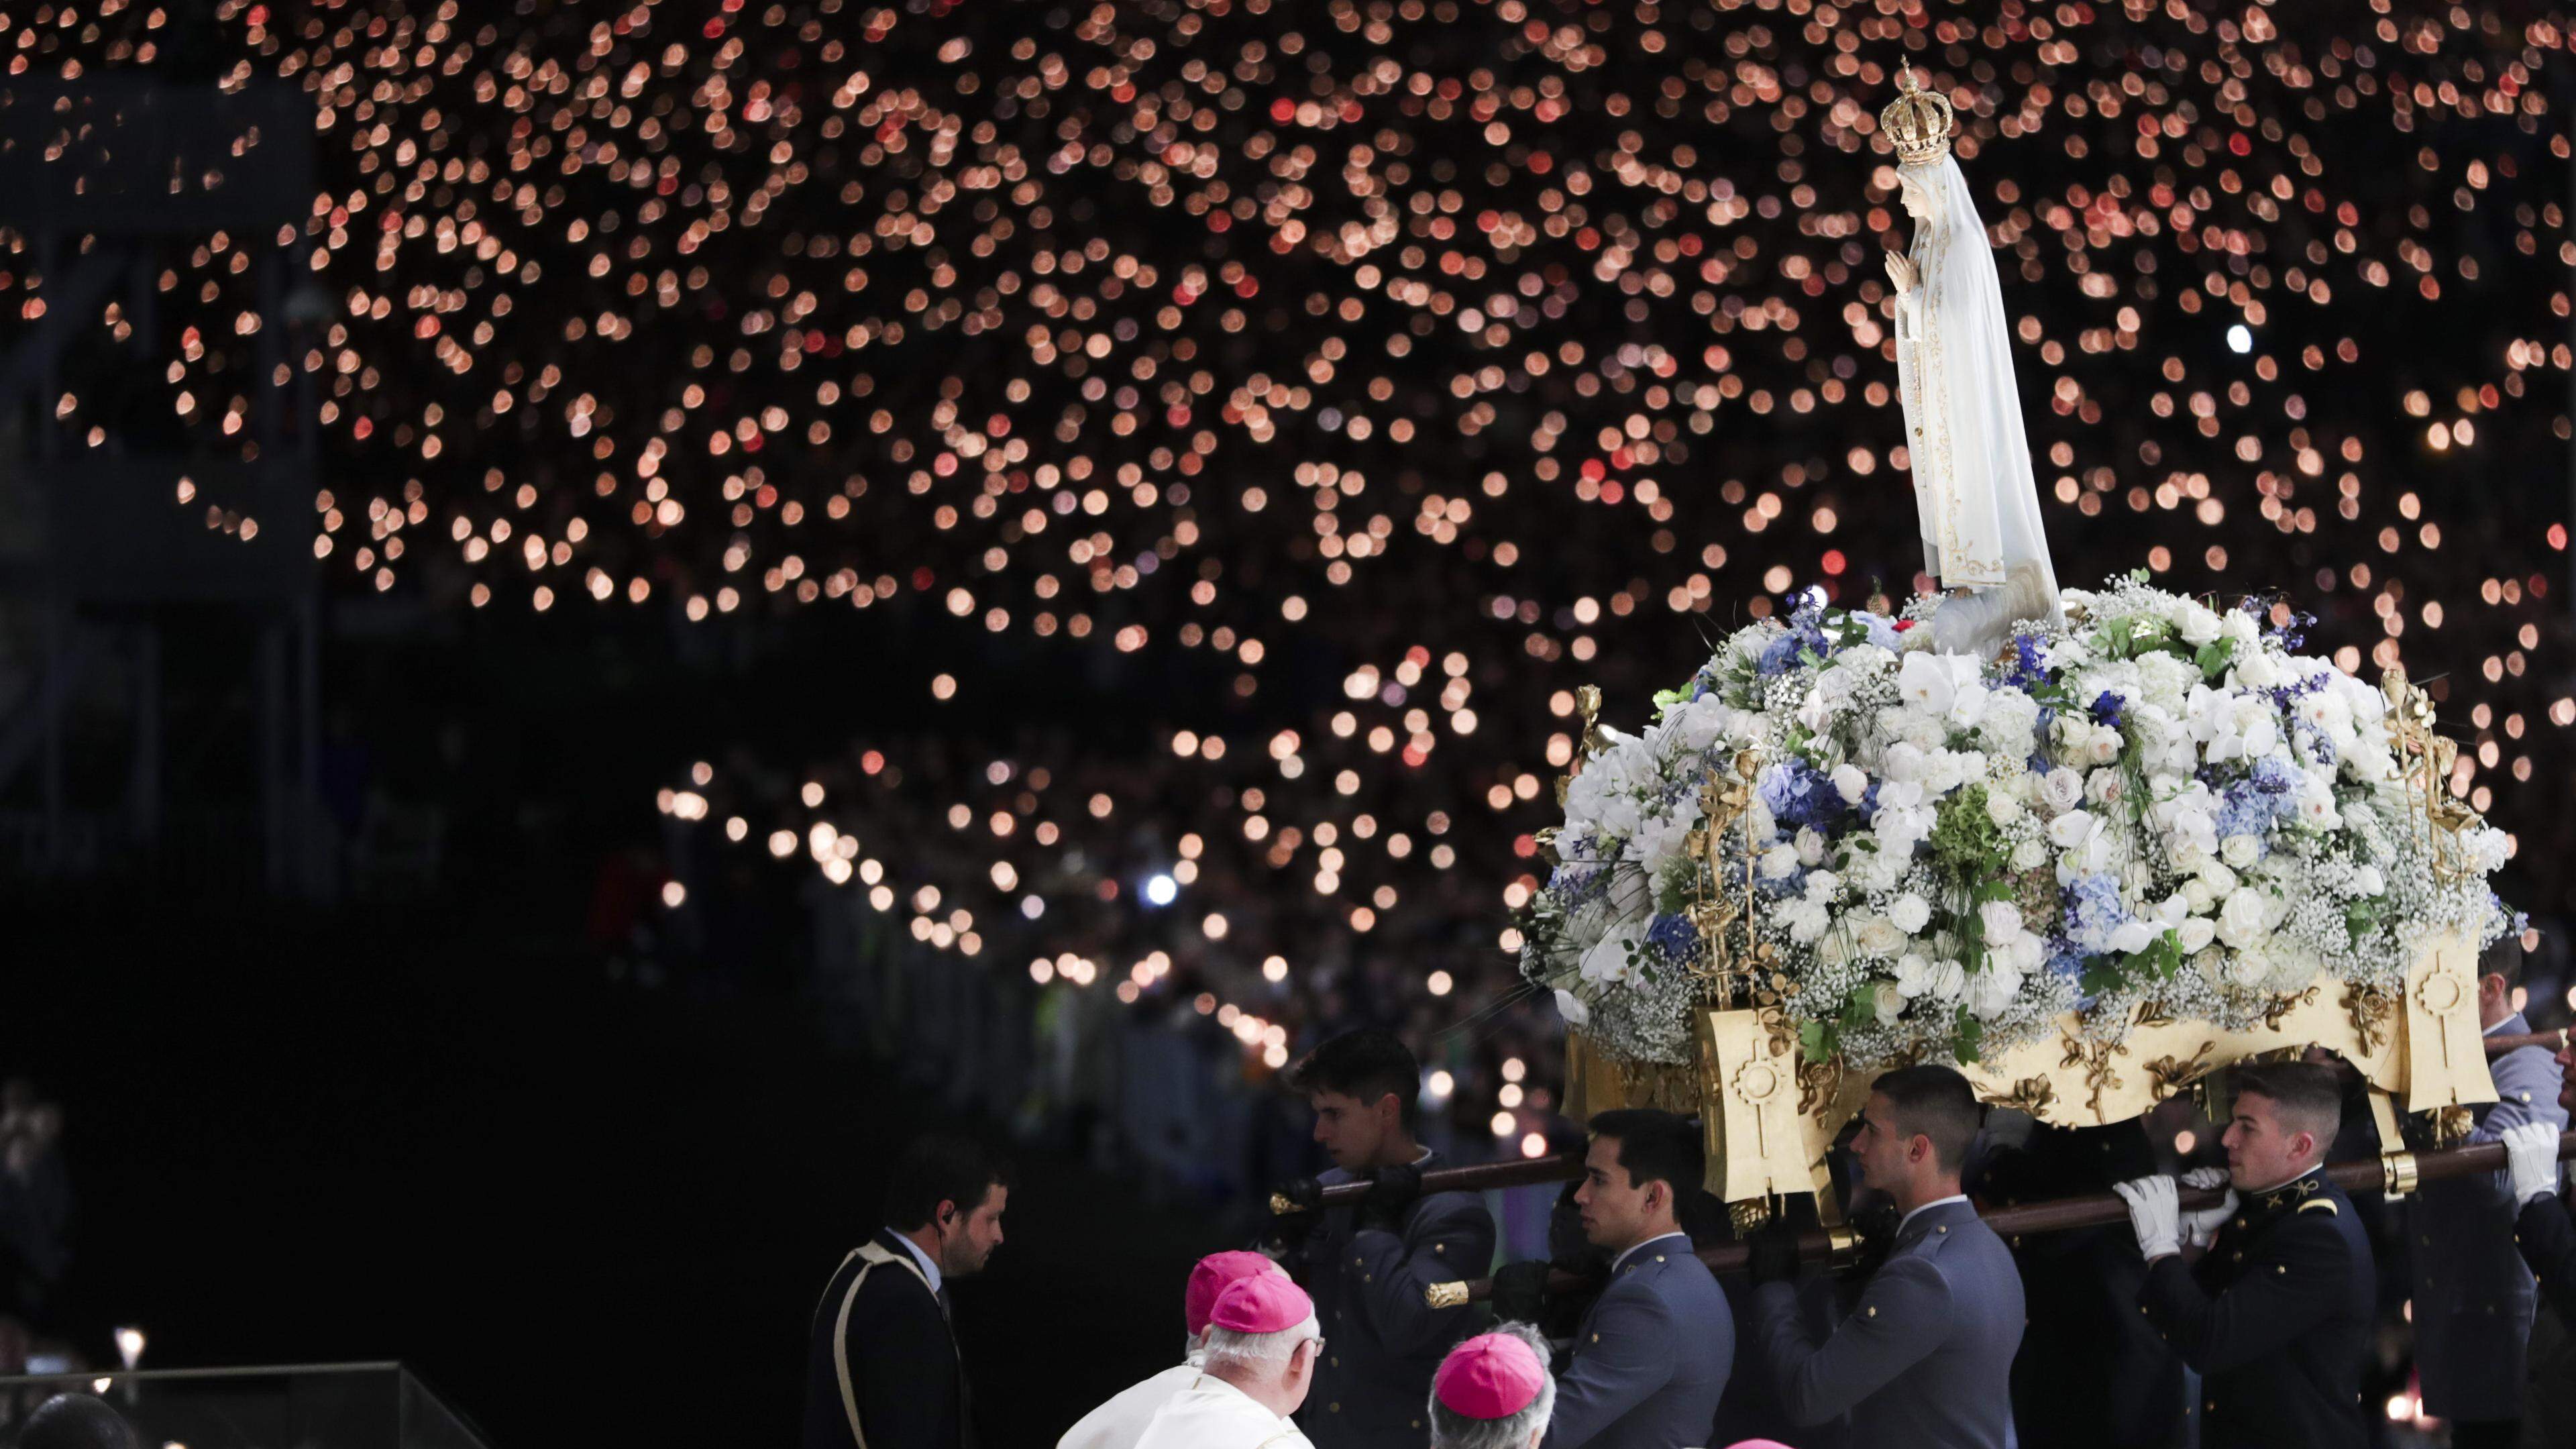 The image of Our Lady of Fatima is transported during the candle lights procession of the 13th May pilgrimage at the Shrine of Fatima, Portugal, 12 May 2024. PAULO CUNHA/LUSA